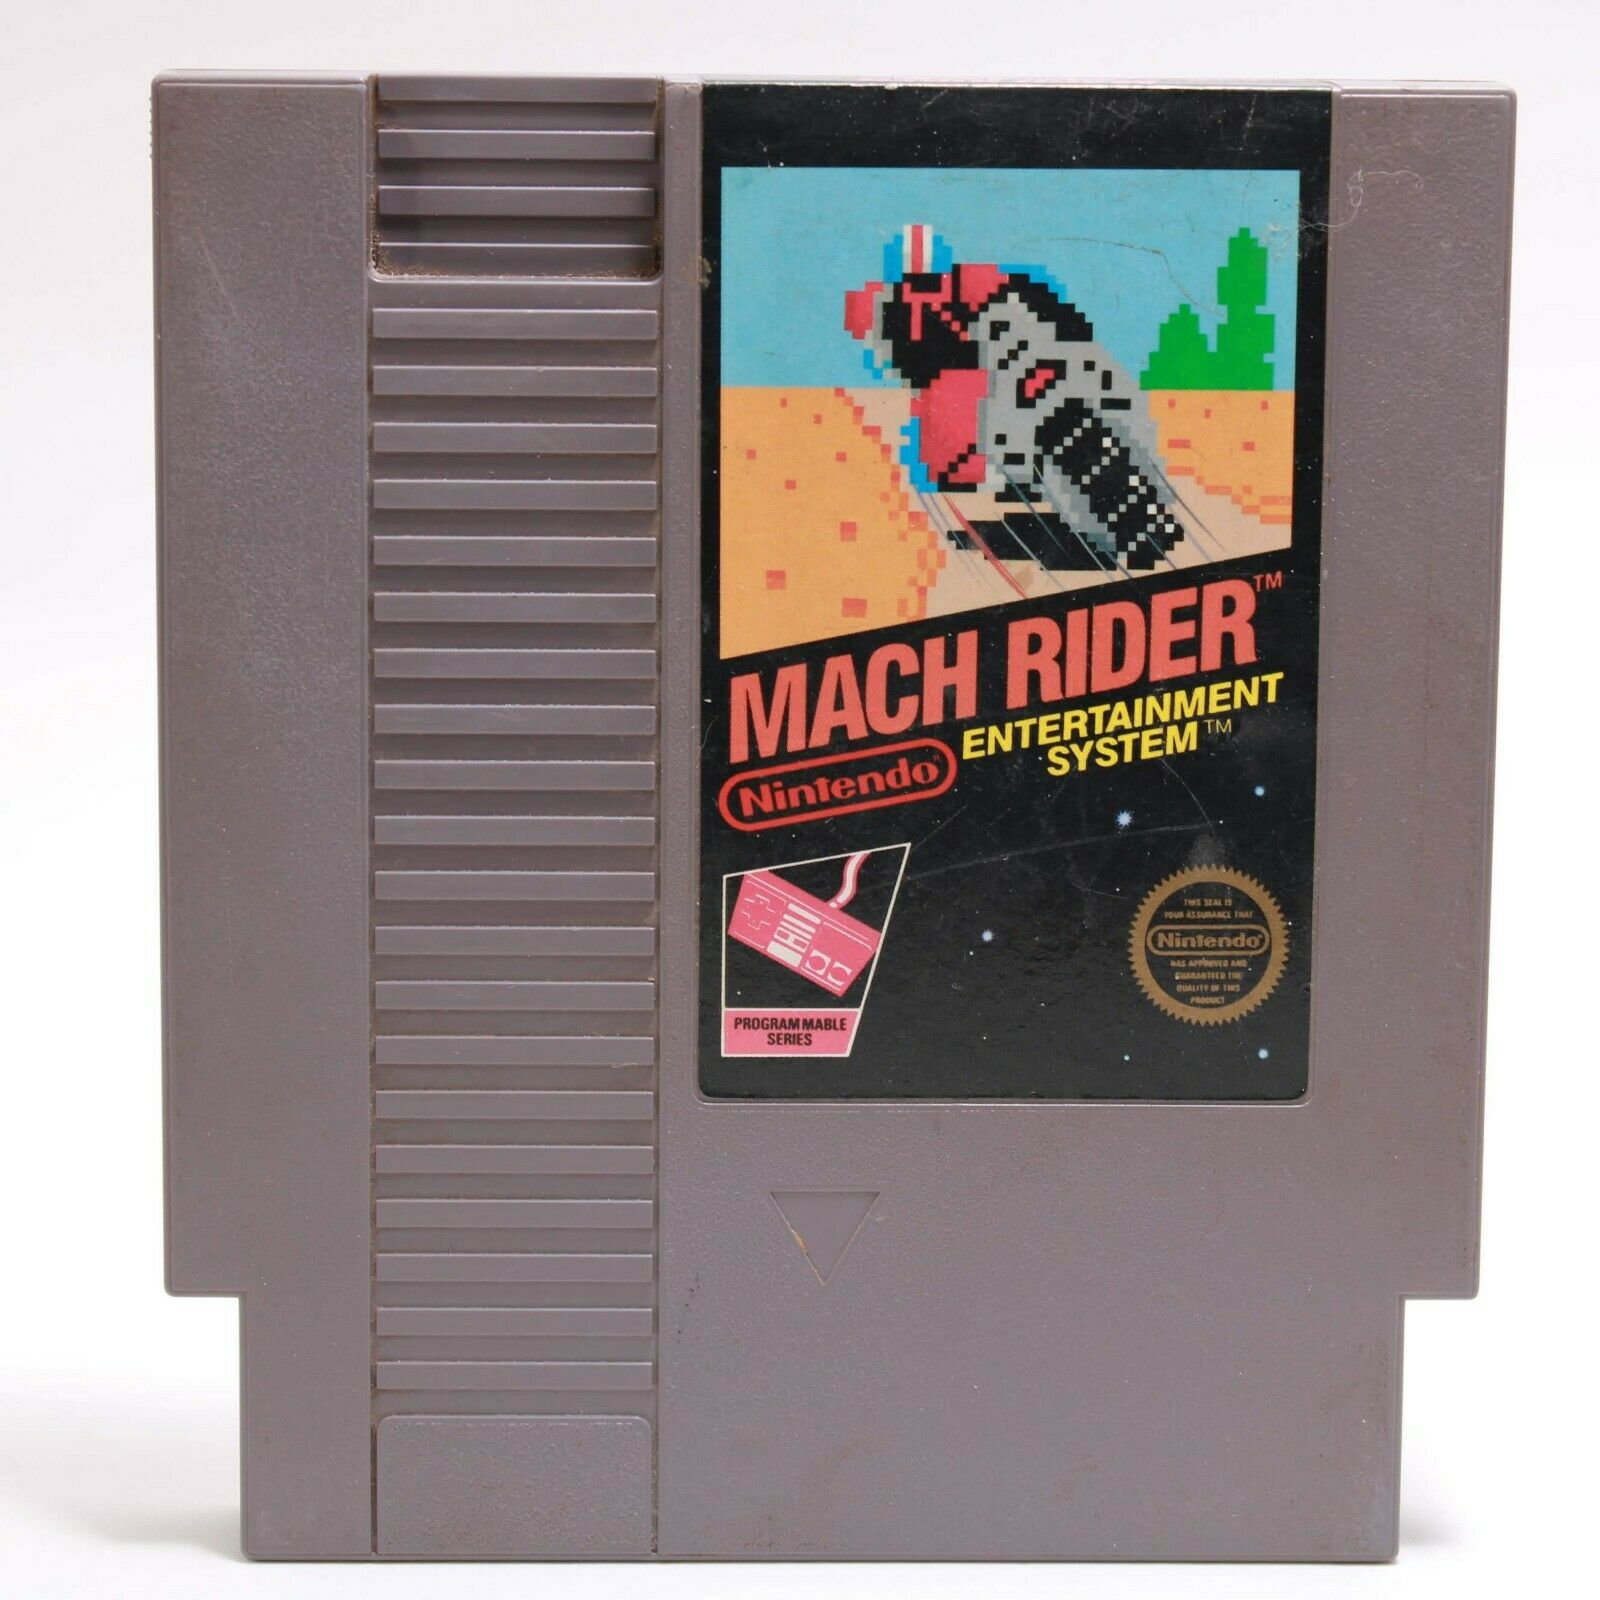 Mach Rider 5-Screw Version: Cartridge - NES Nintendo - Cleaned, Tested & Working